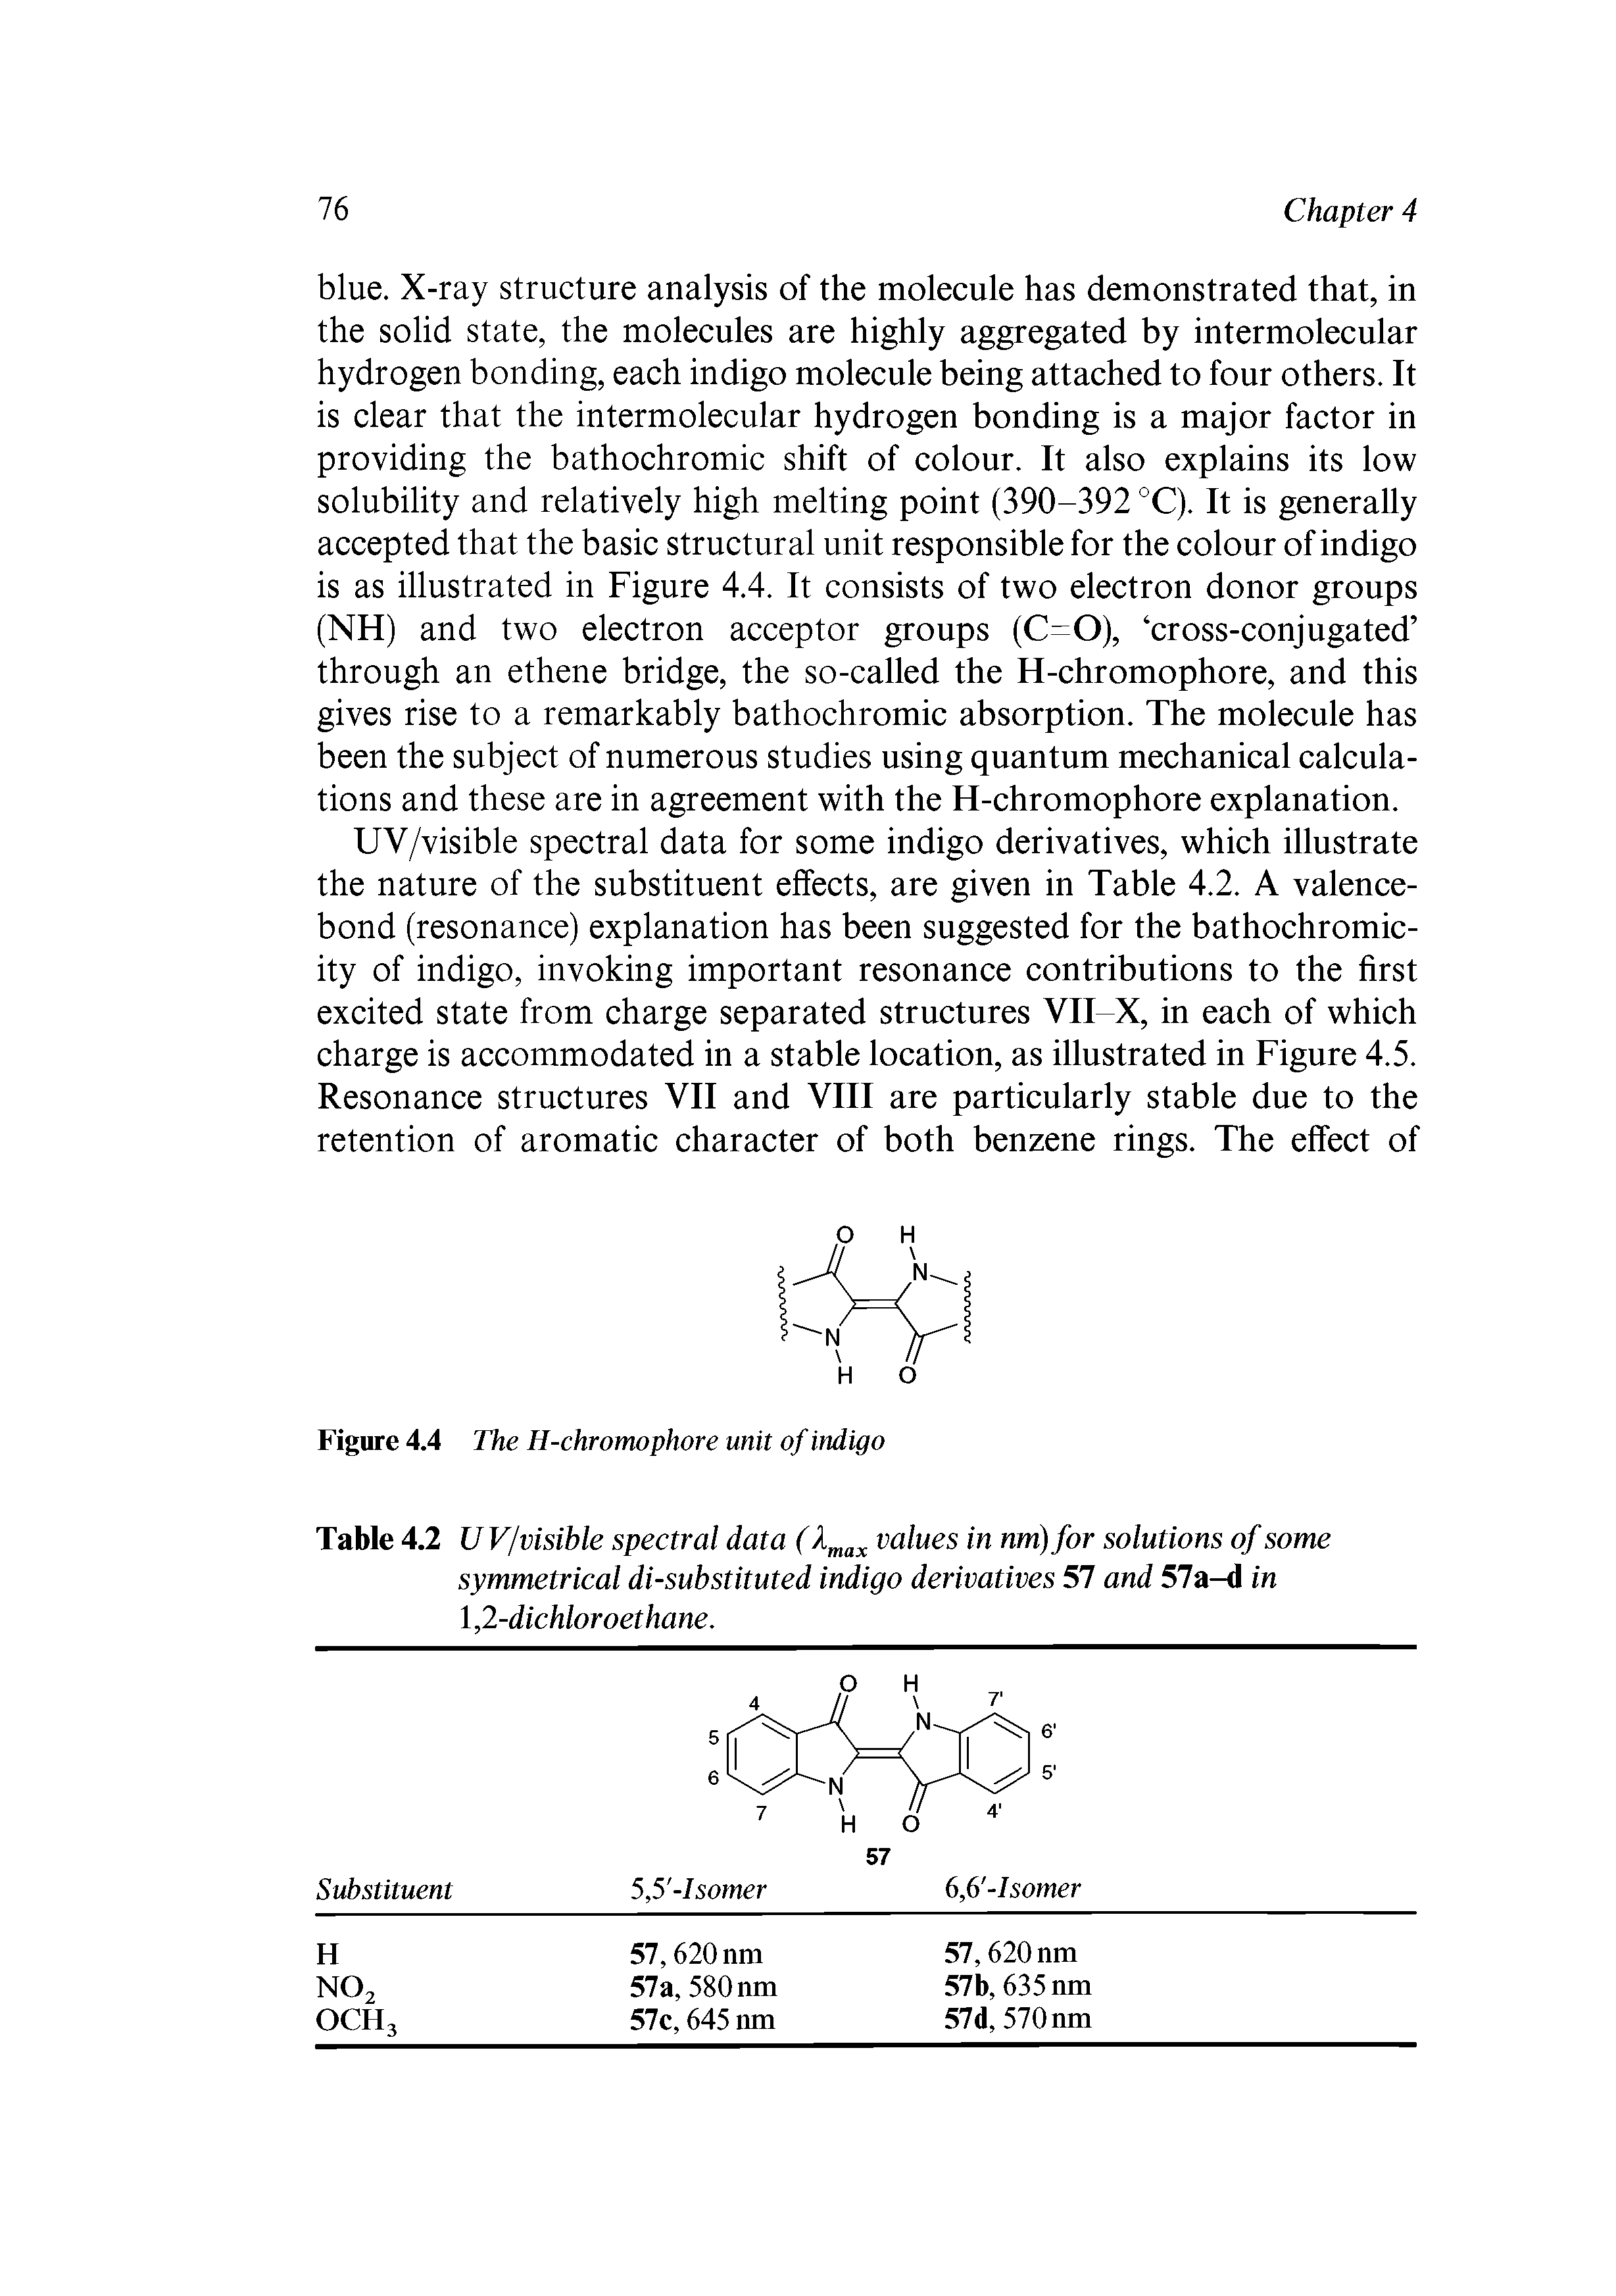 Table 4.2 UV/visible spectral data (Xmax values in nm) for solutions of some symmetrical di-substituted indigo derivatives 57 and 57a-d in 1,2-dichloroethane.